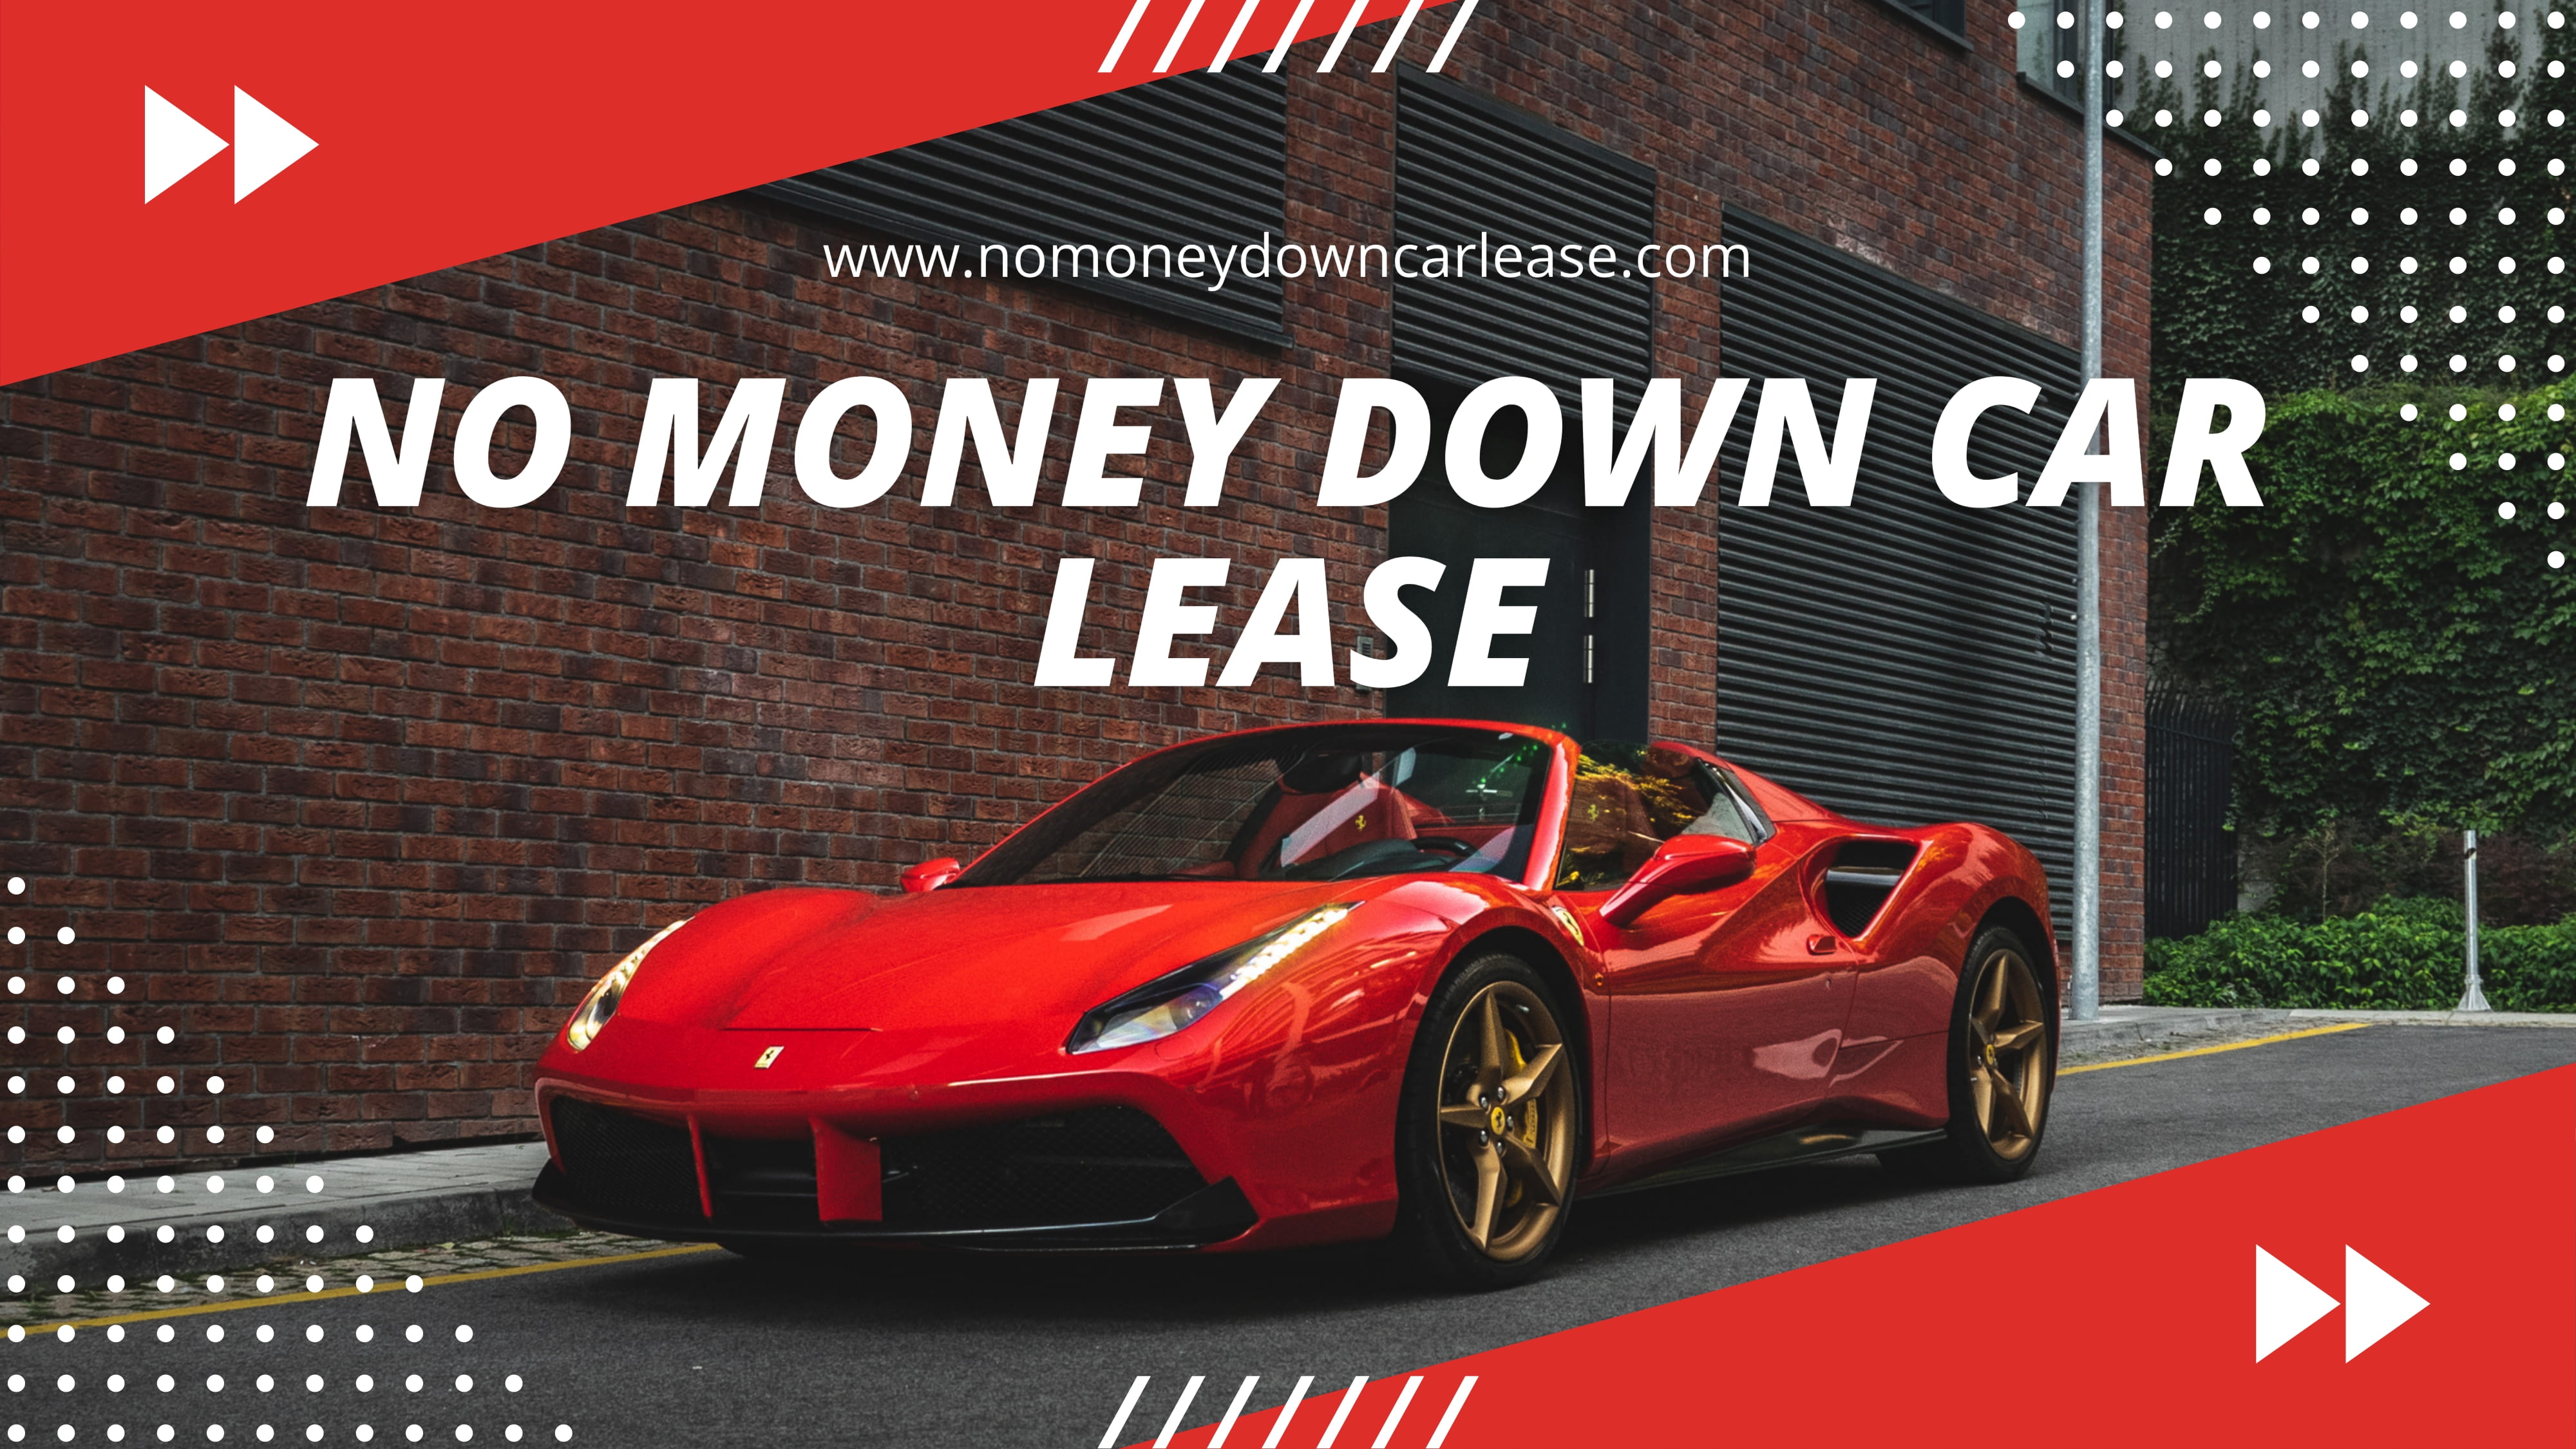 0$-Down Car Leasing in No Money Down Car Lease, Online Event